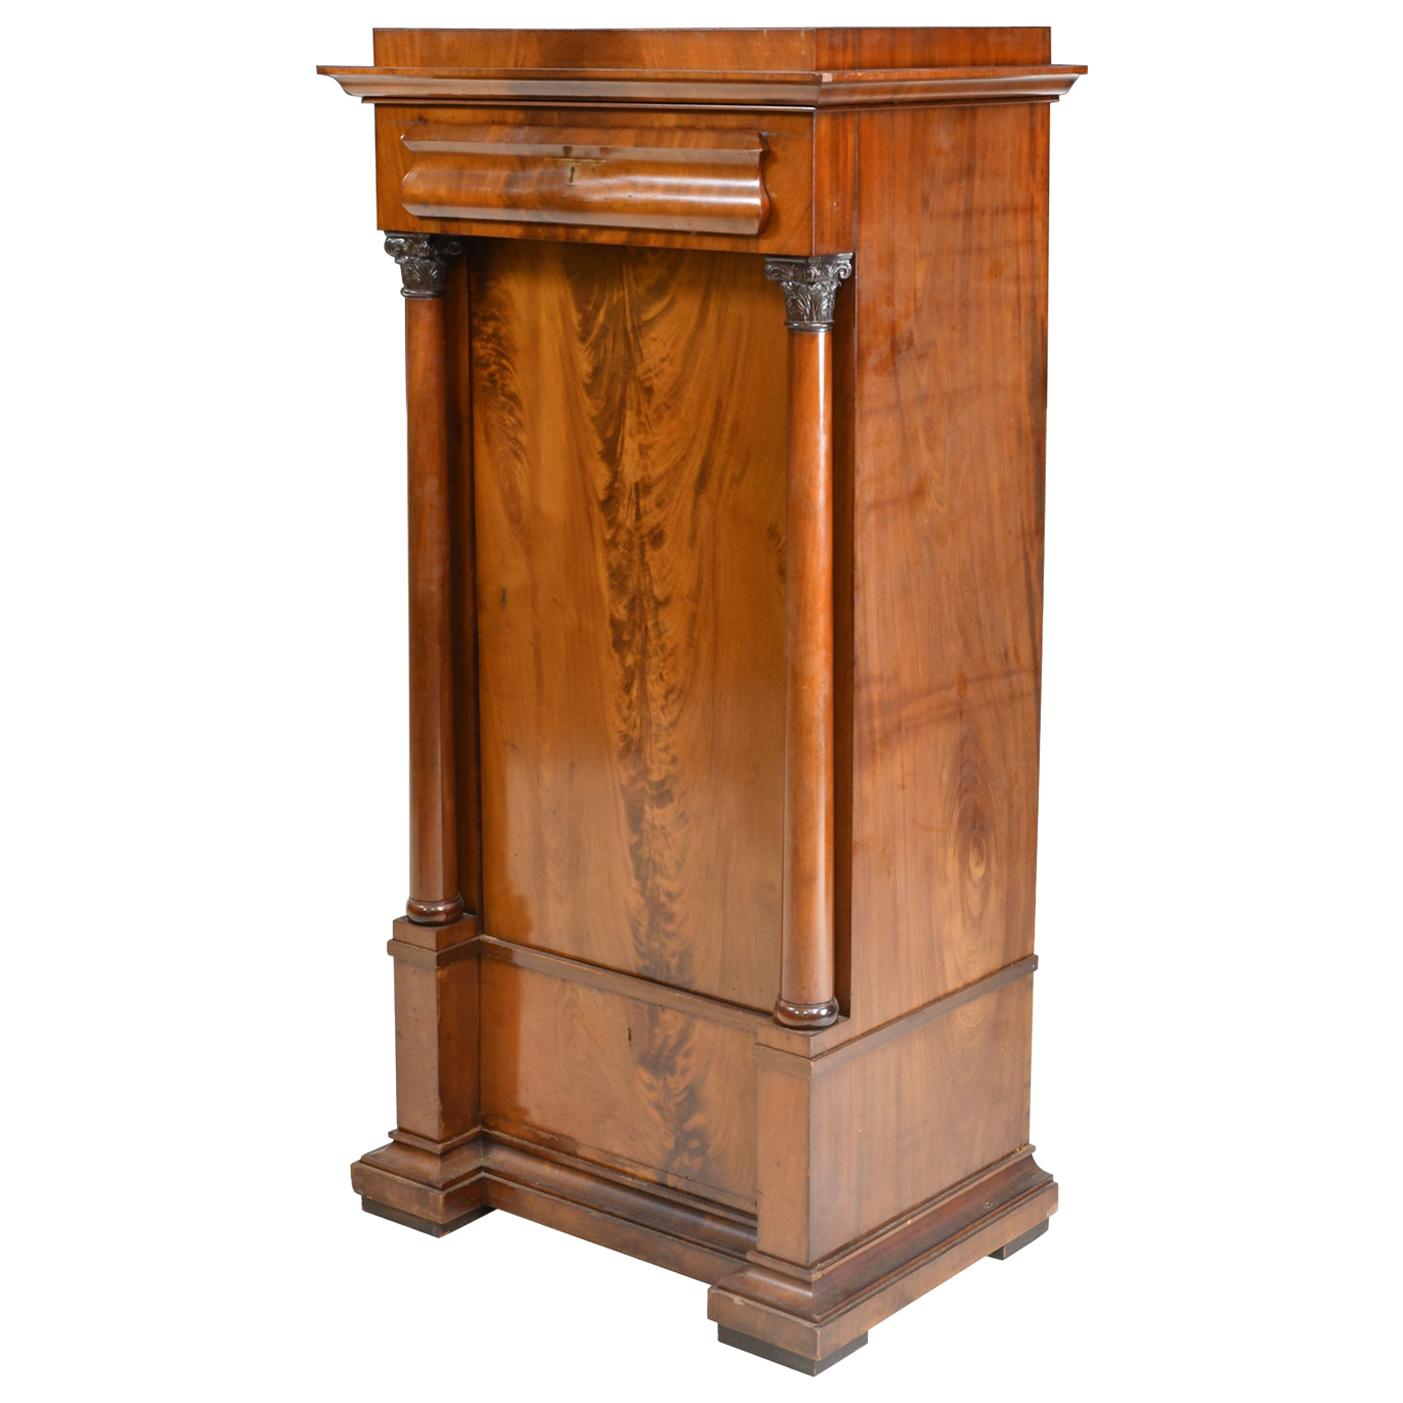 Danish Pedestal Cabinet with Full Columns and Carved Capitals in Mahogany